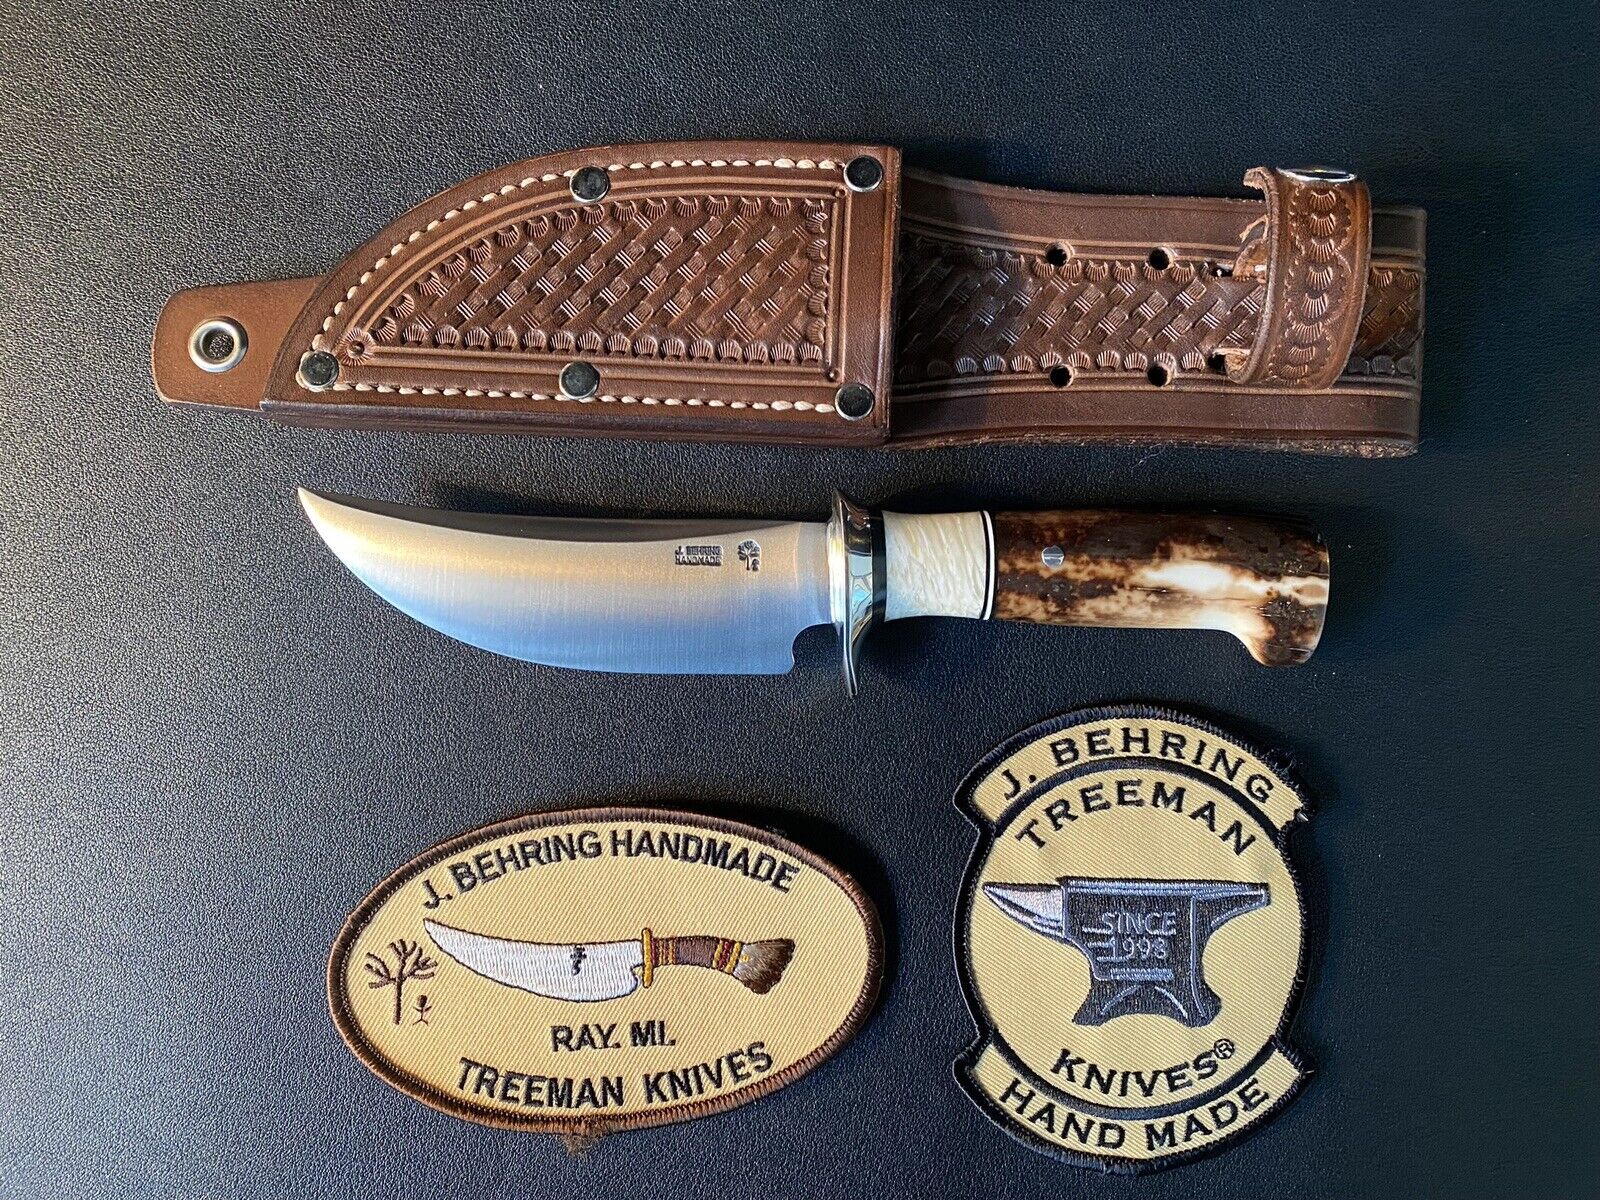 Jim Behring Treeman Knives Hunter, 4 1/4 In Carbon Blade, Musk Ox and Walrus.